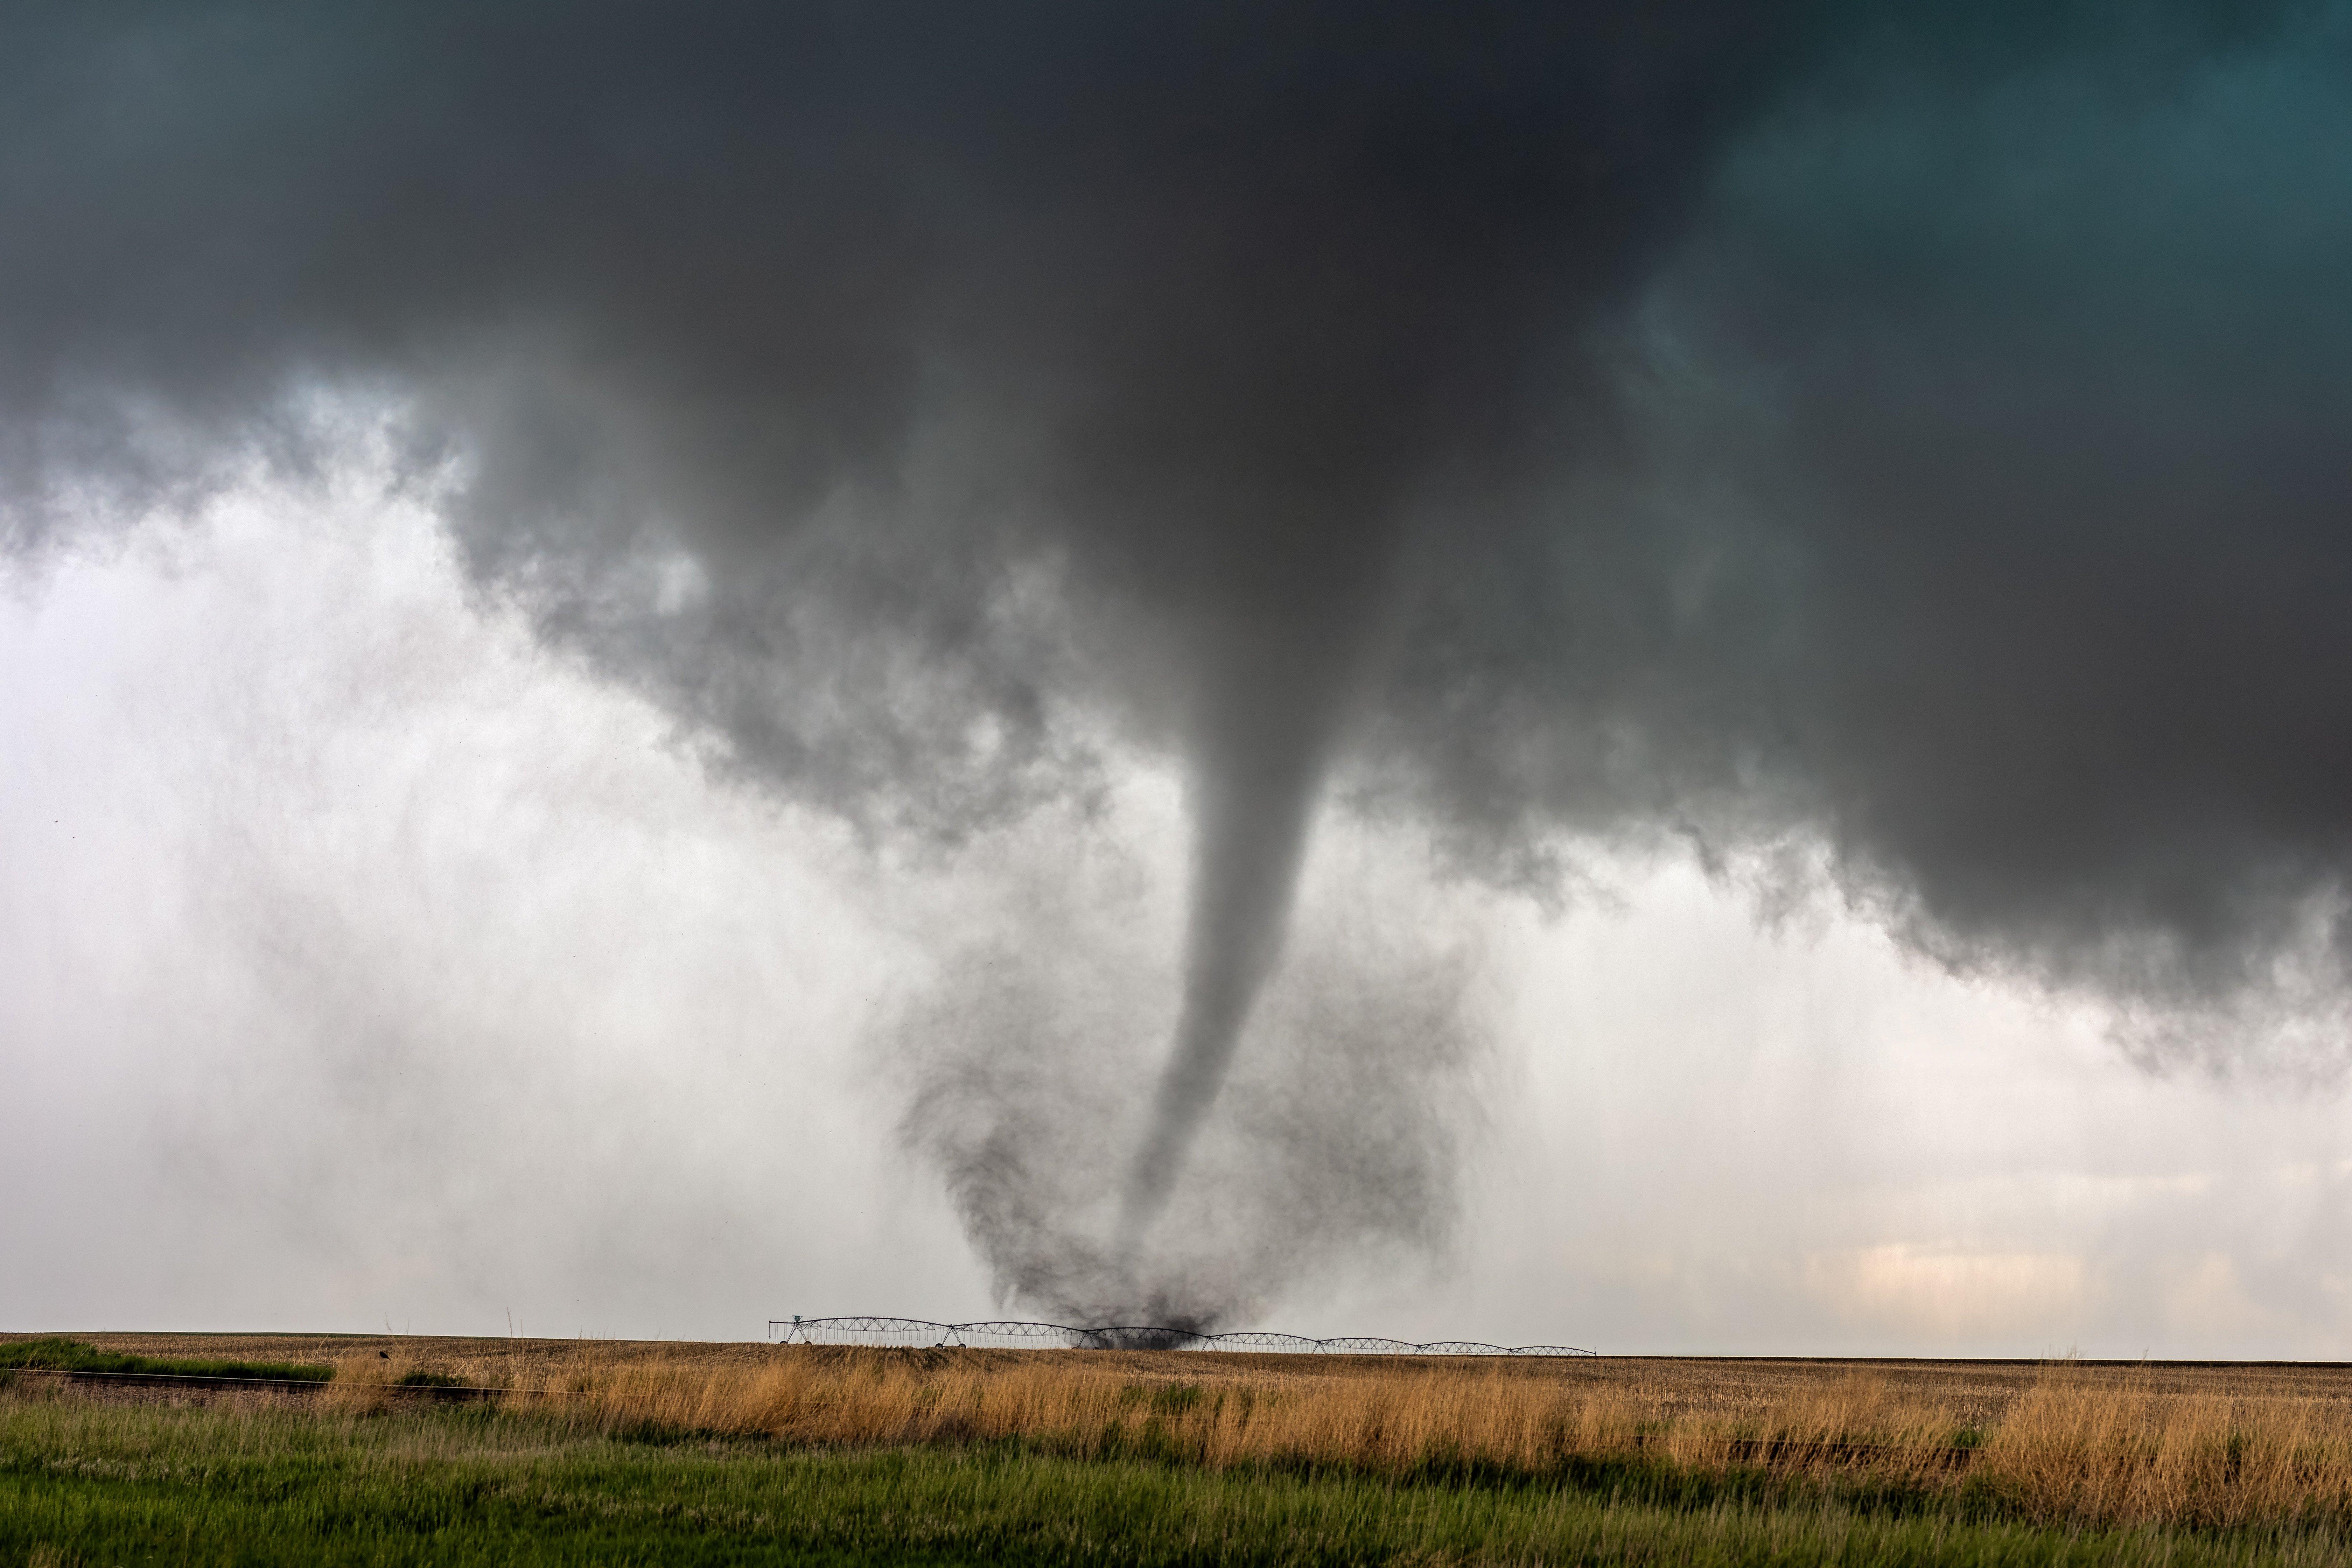 A tornado touches down behind an irrigation structure in a field of crops.